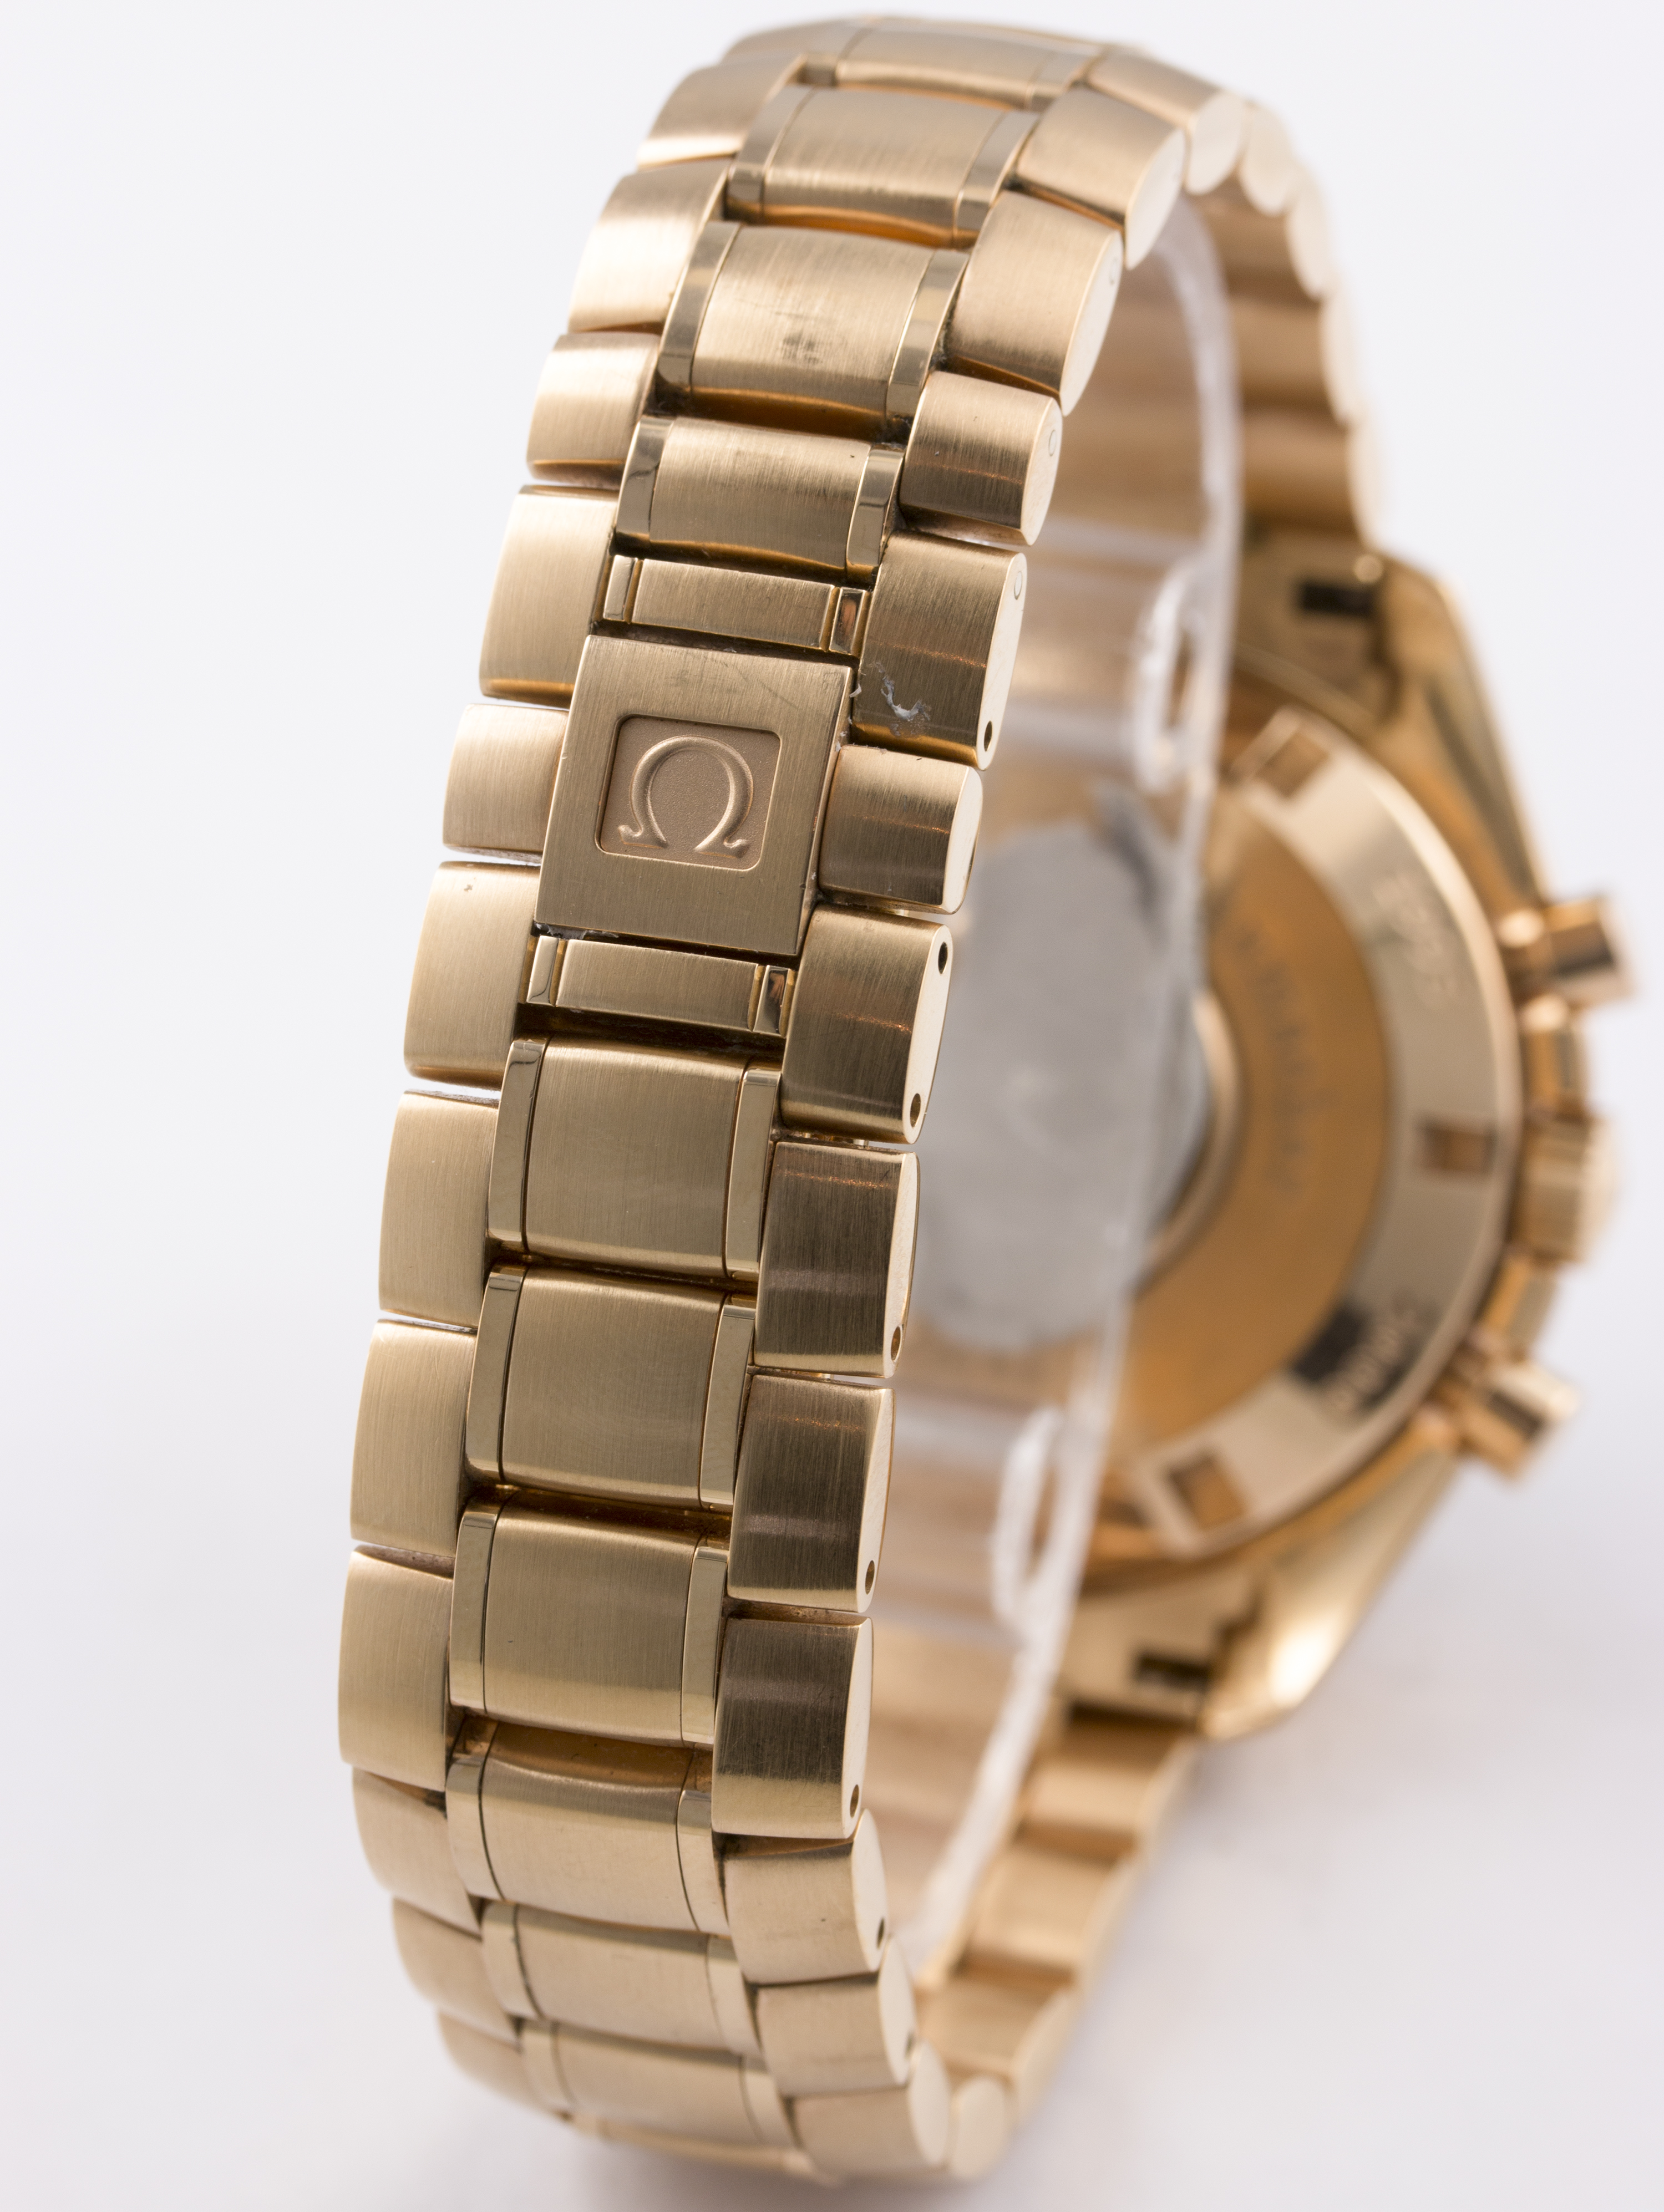 A FINE & RARE GENTLEMAN'S 18K ROSE GOLD OMEGA SPEEDMASTER AUTOMATIC CHRONOGRAPH BRACELET WATCH DATED - Image 7 of 8